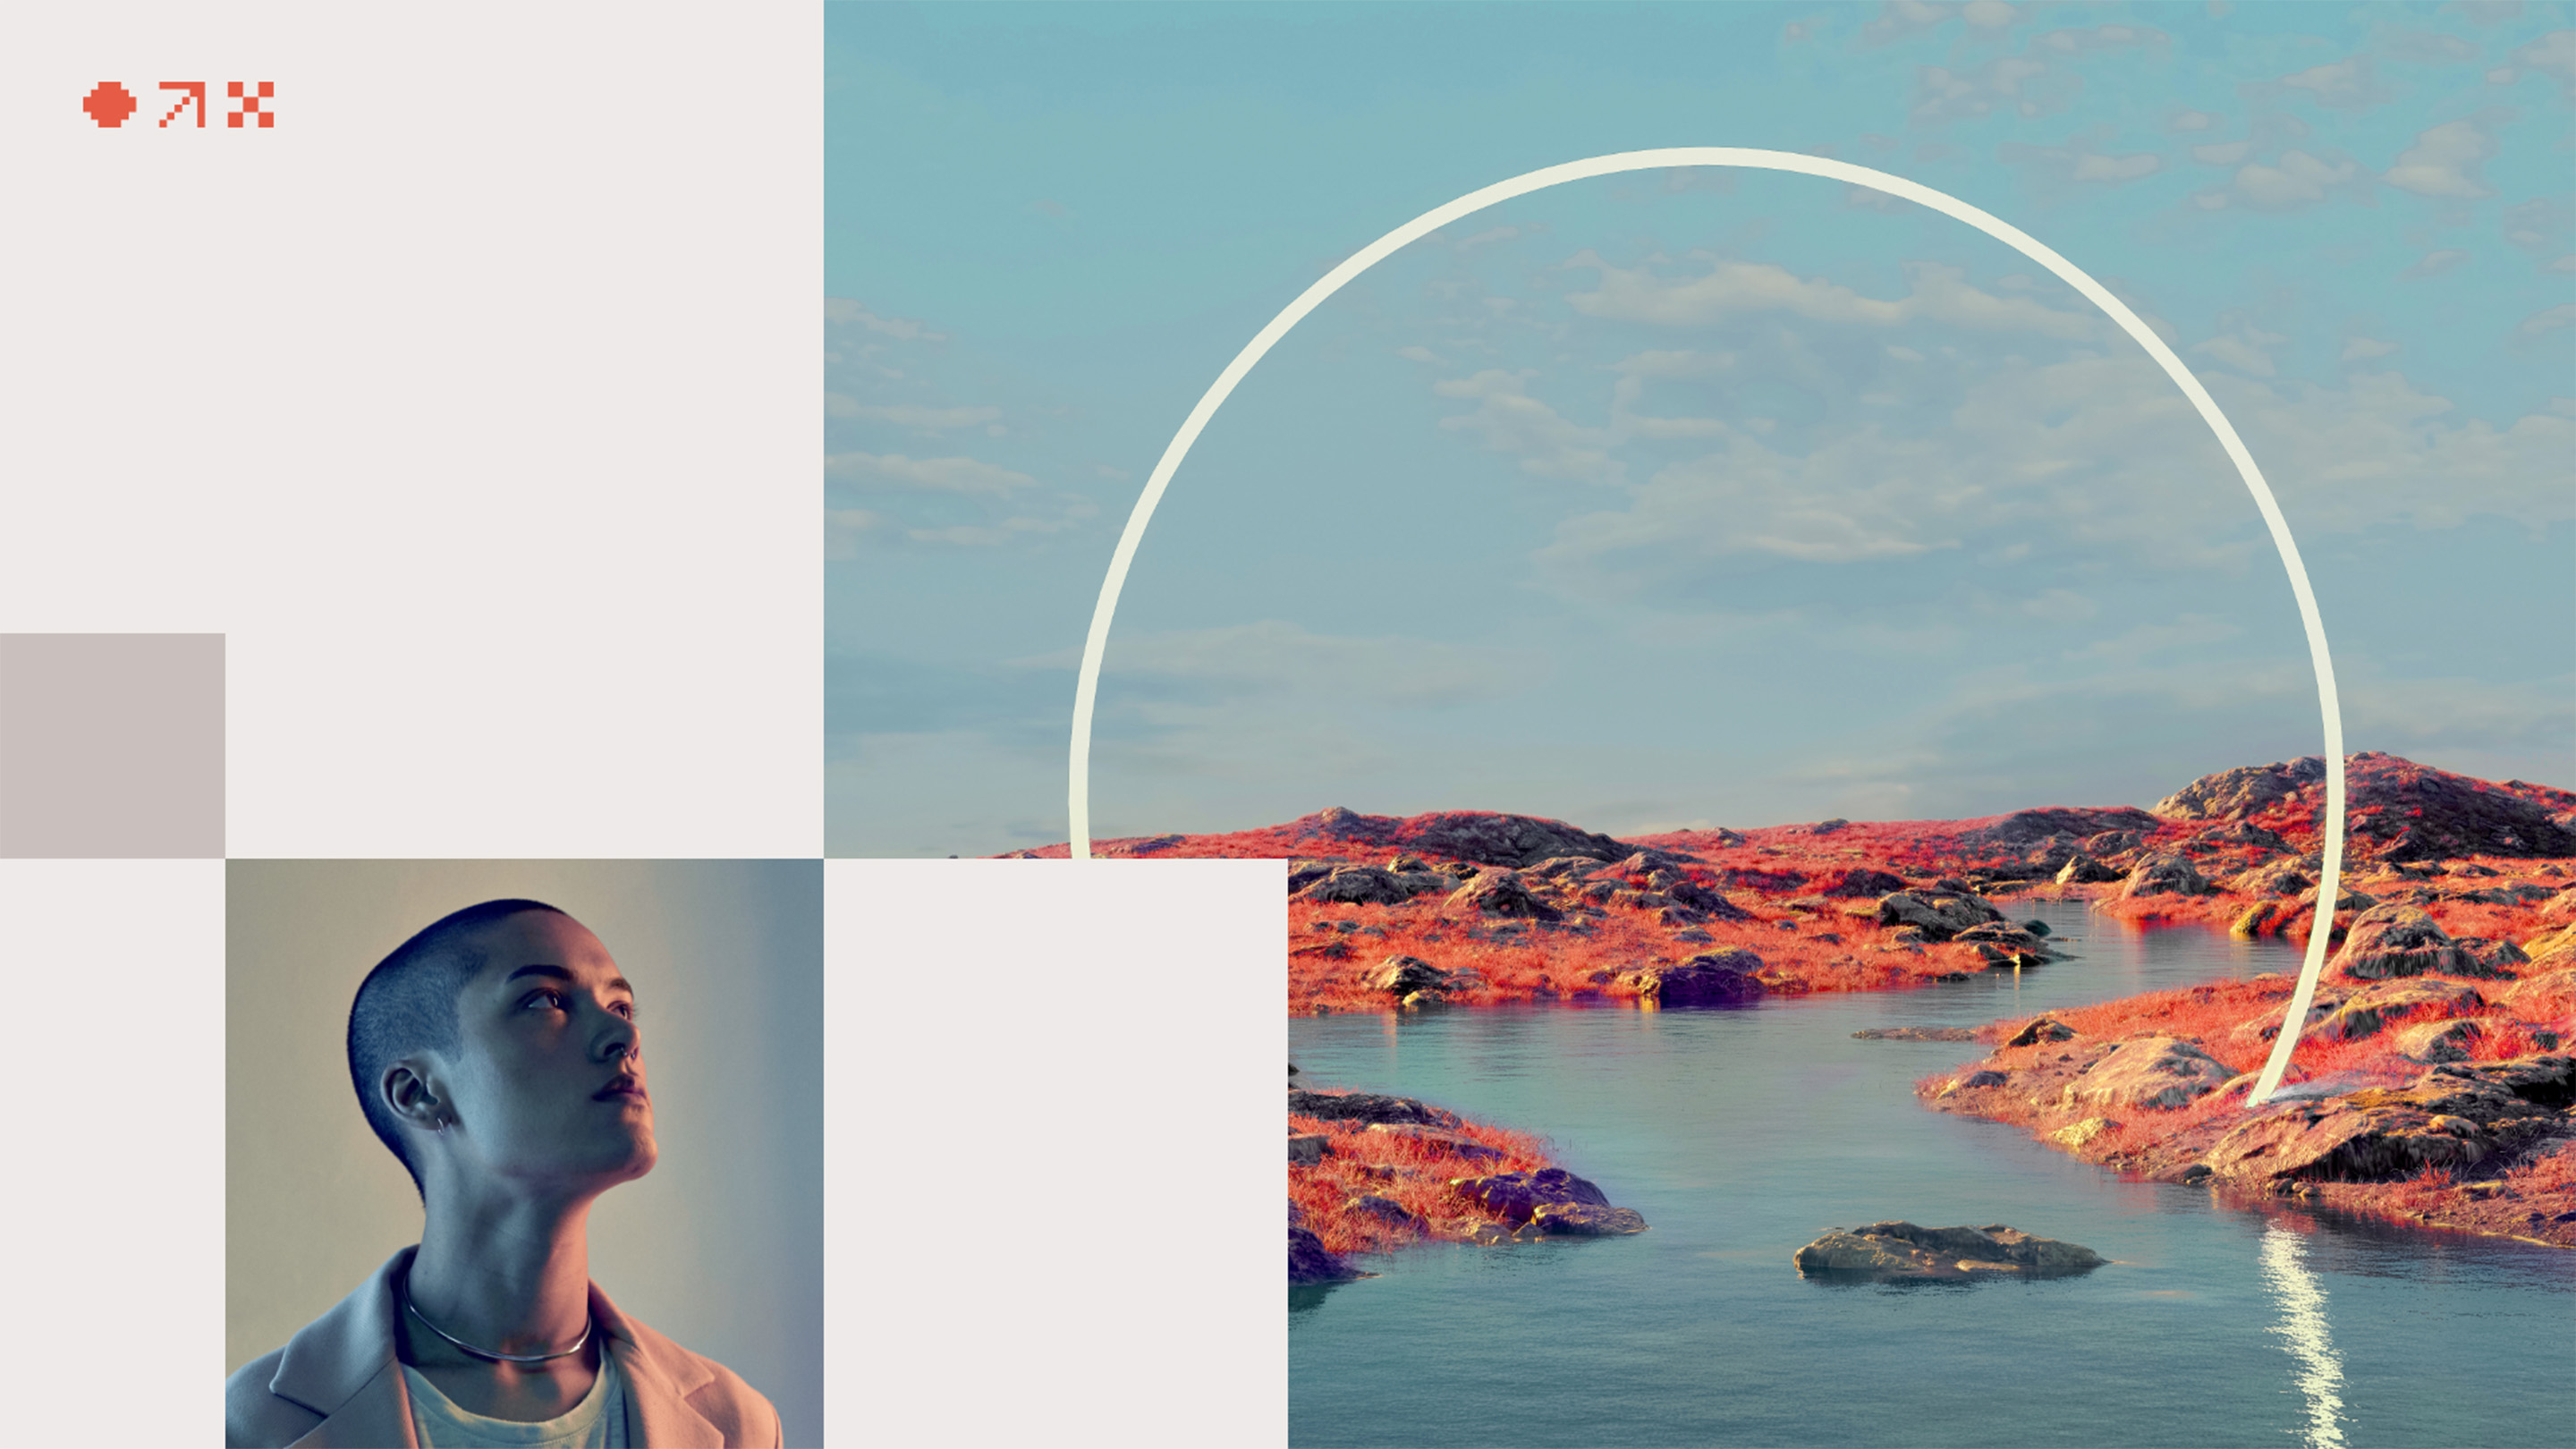 A red nature landscape, a sky with white arcs, and a side view of a thoughtful shaved man are each placed within a square grid.